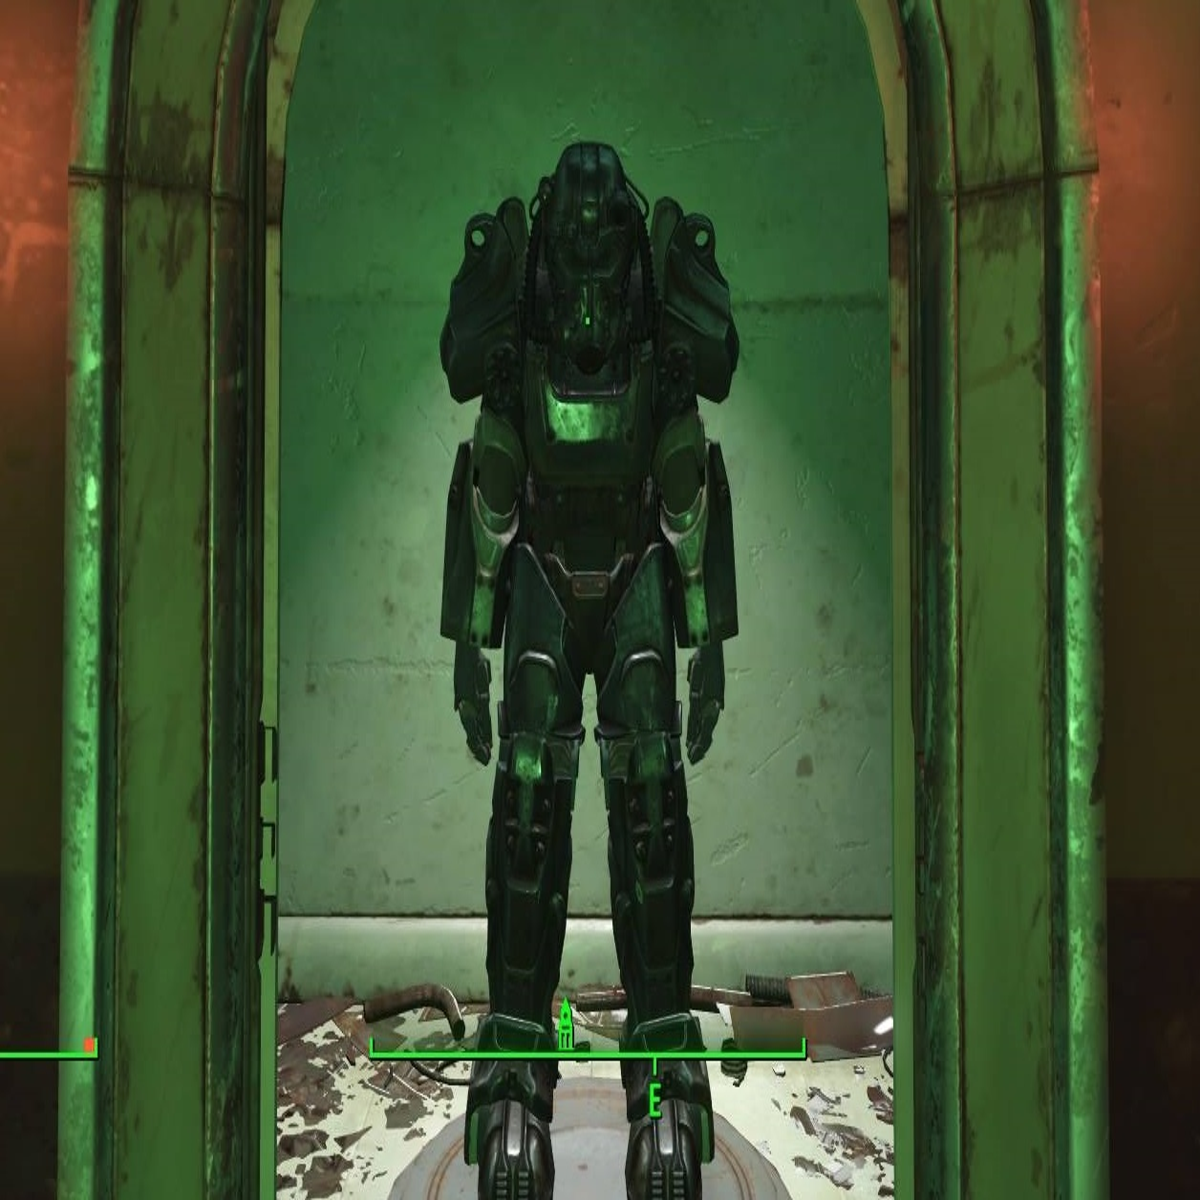 Galaxy niveau Displacement Fallout 4: the easiest way to get the X-01 Power Armor | VG247